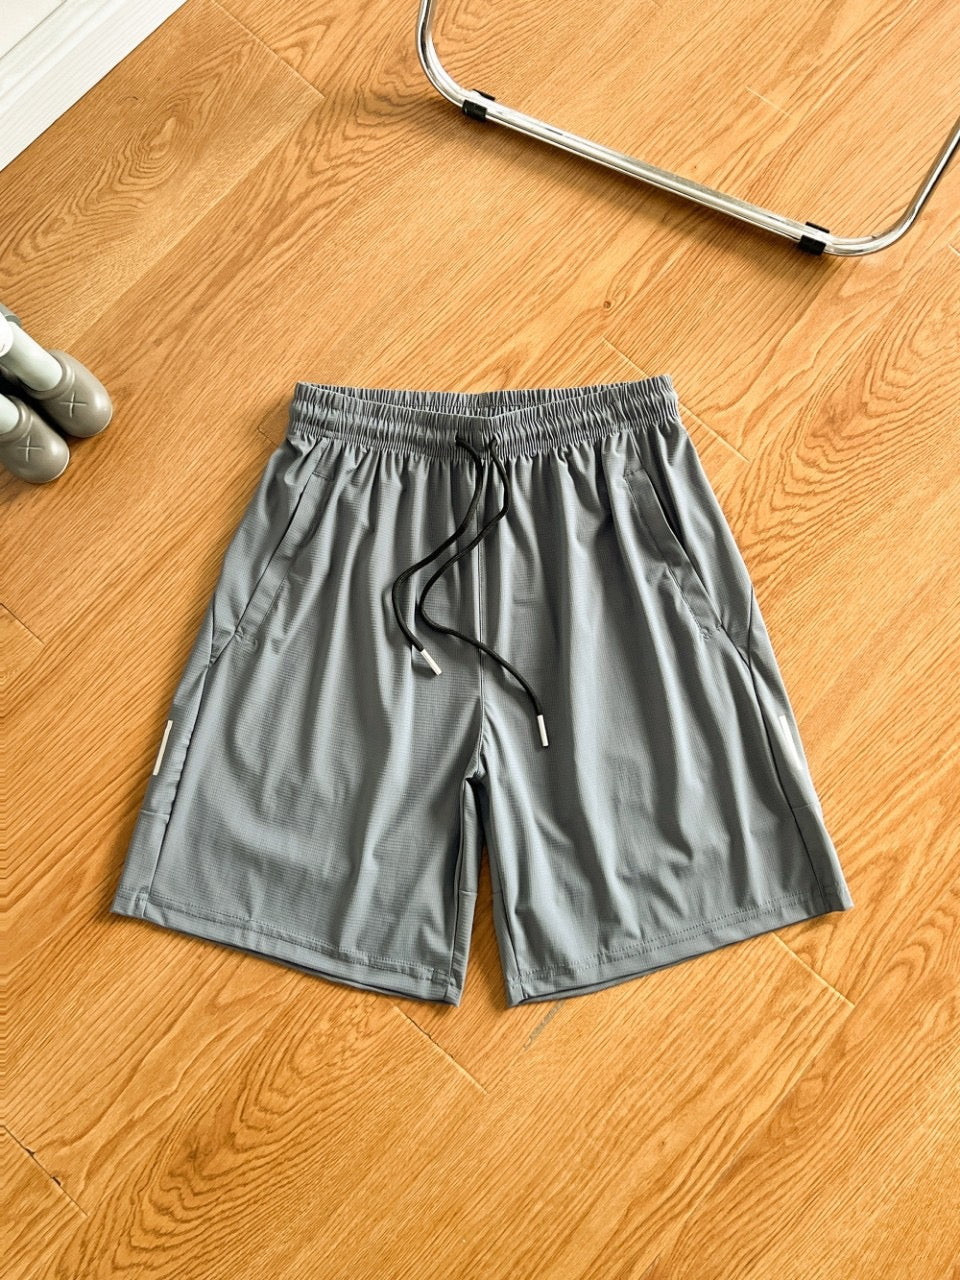 L2996# Outdoor Sports Shorts